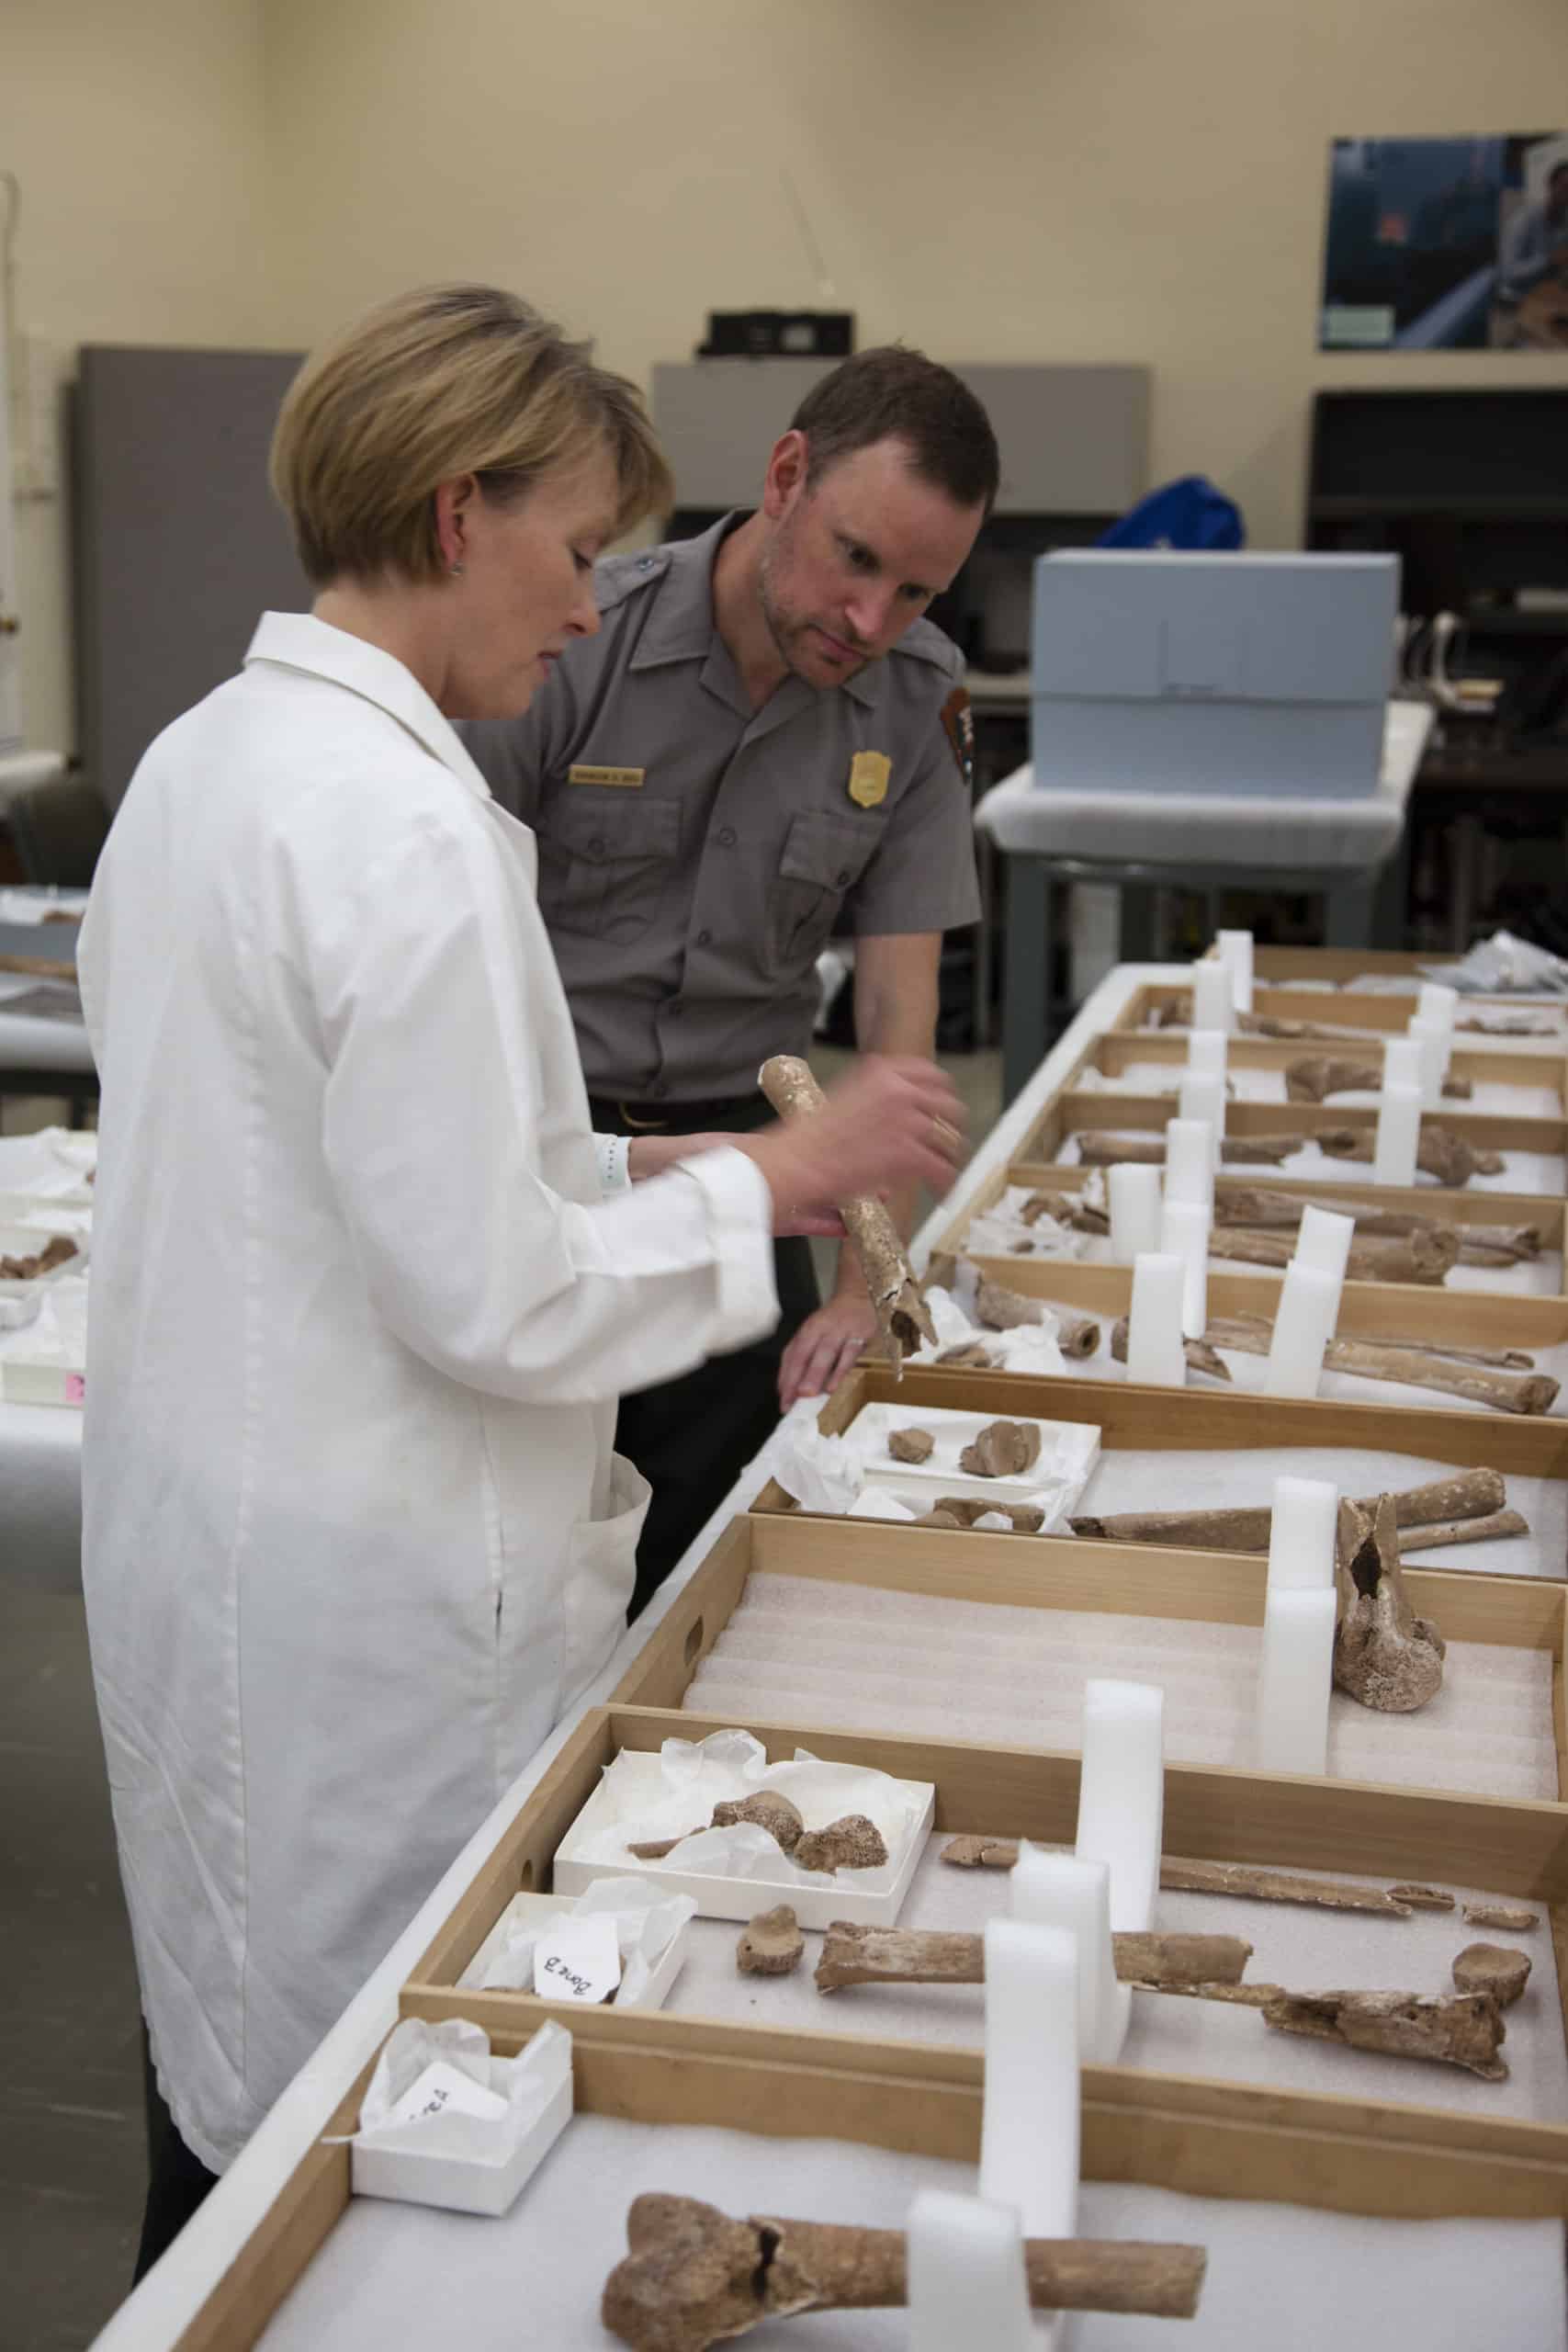 Manassas National Battlefield Park Superintendent Brandon Bies inspects an amputated limb with Smithsonian scientist Kari Bruwelheide, 2018. Bies is a trained archeologist and participated in the excavation at Manassas.